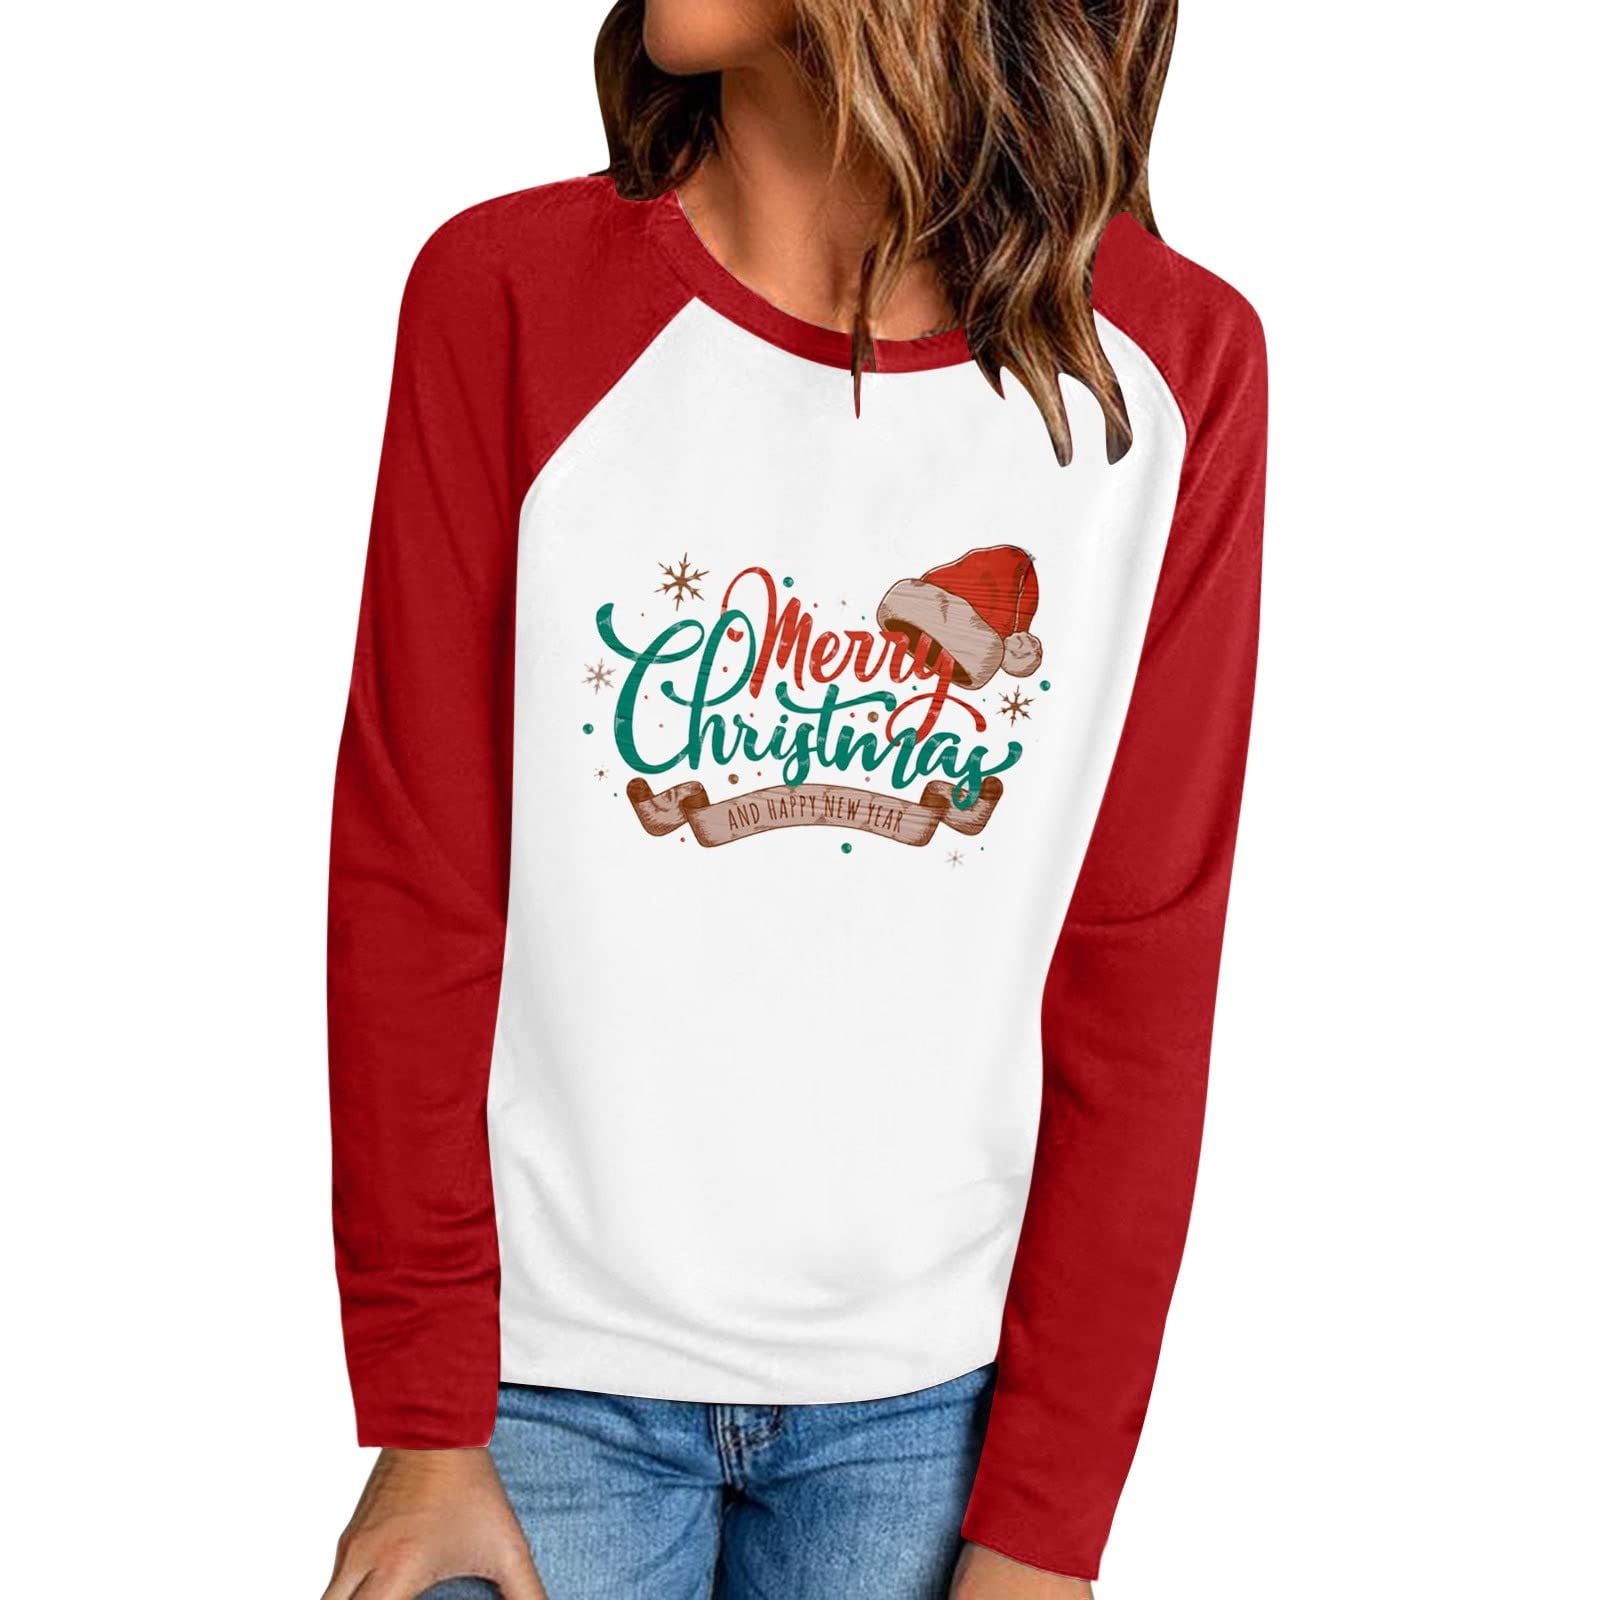 Merry Christmas Womens Casual Trendy Long Sleeve Shirts Cute Xmas Print Round Neck Lightweight Pullover Tunic Tops 